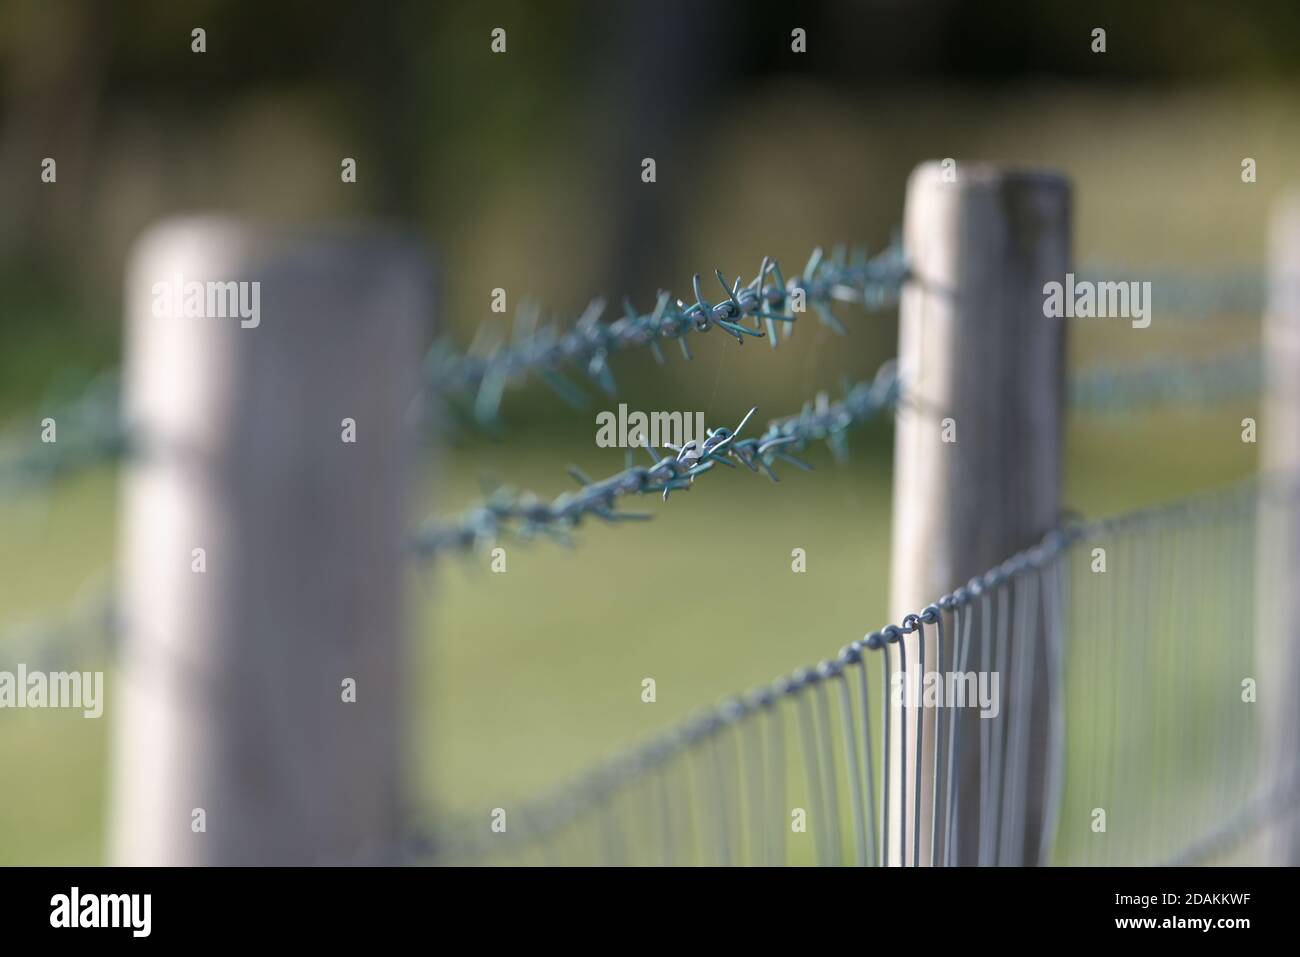 Shallow depth of field created by selective focus on a rural barbed wire fence. Thin cobweb between the wires, side lit by natural daylight sun. Stock Photo